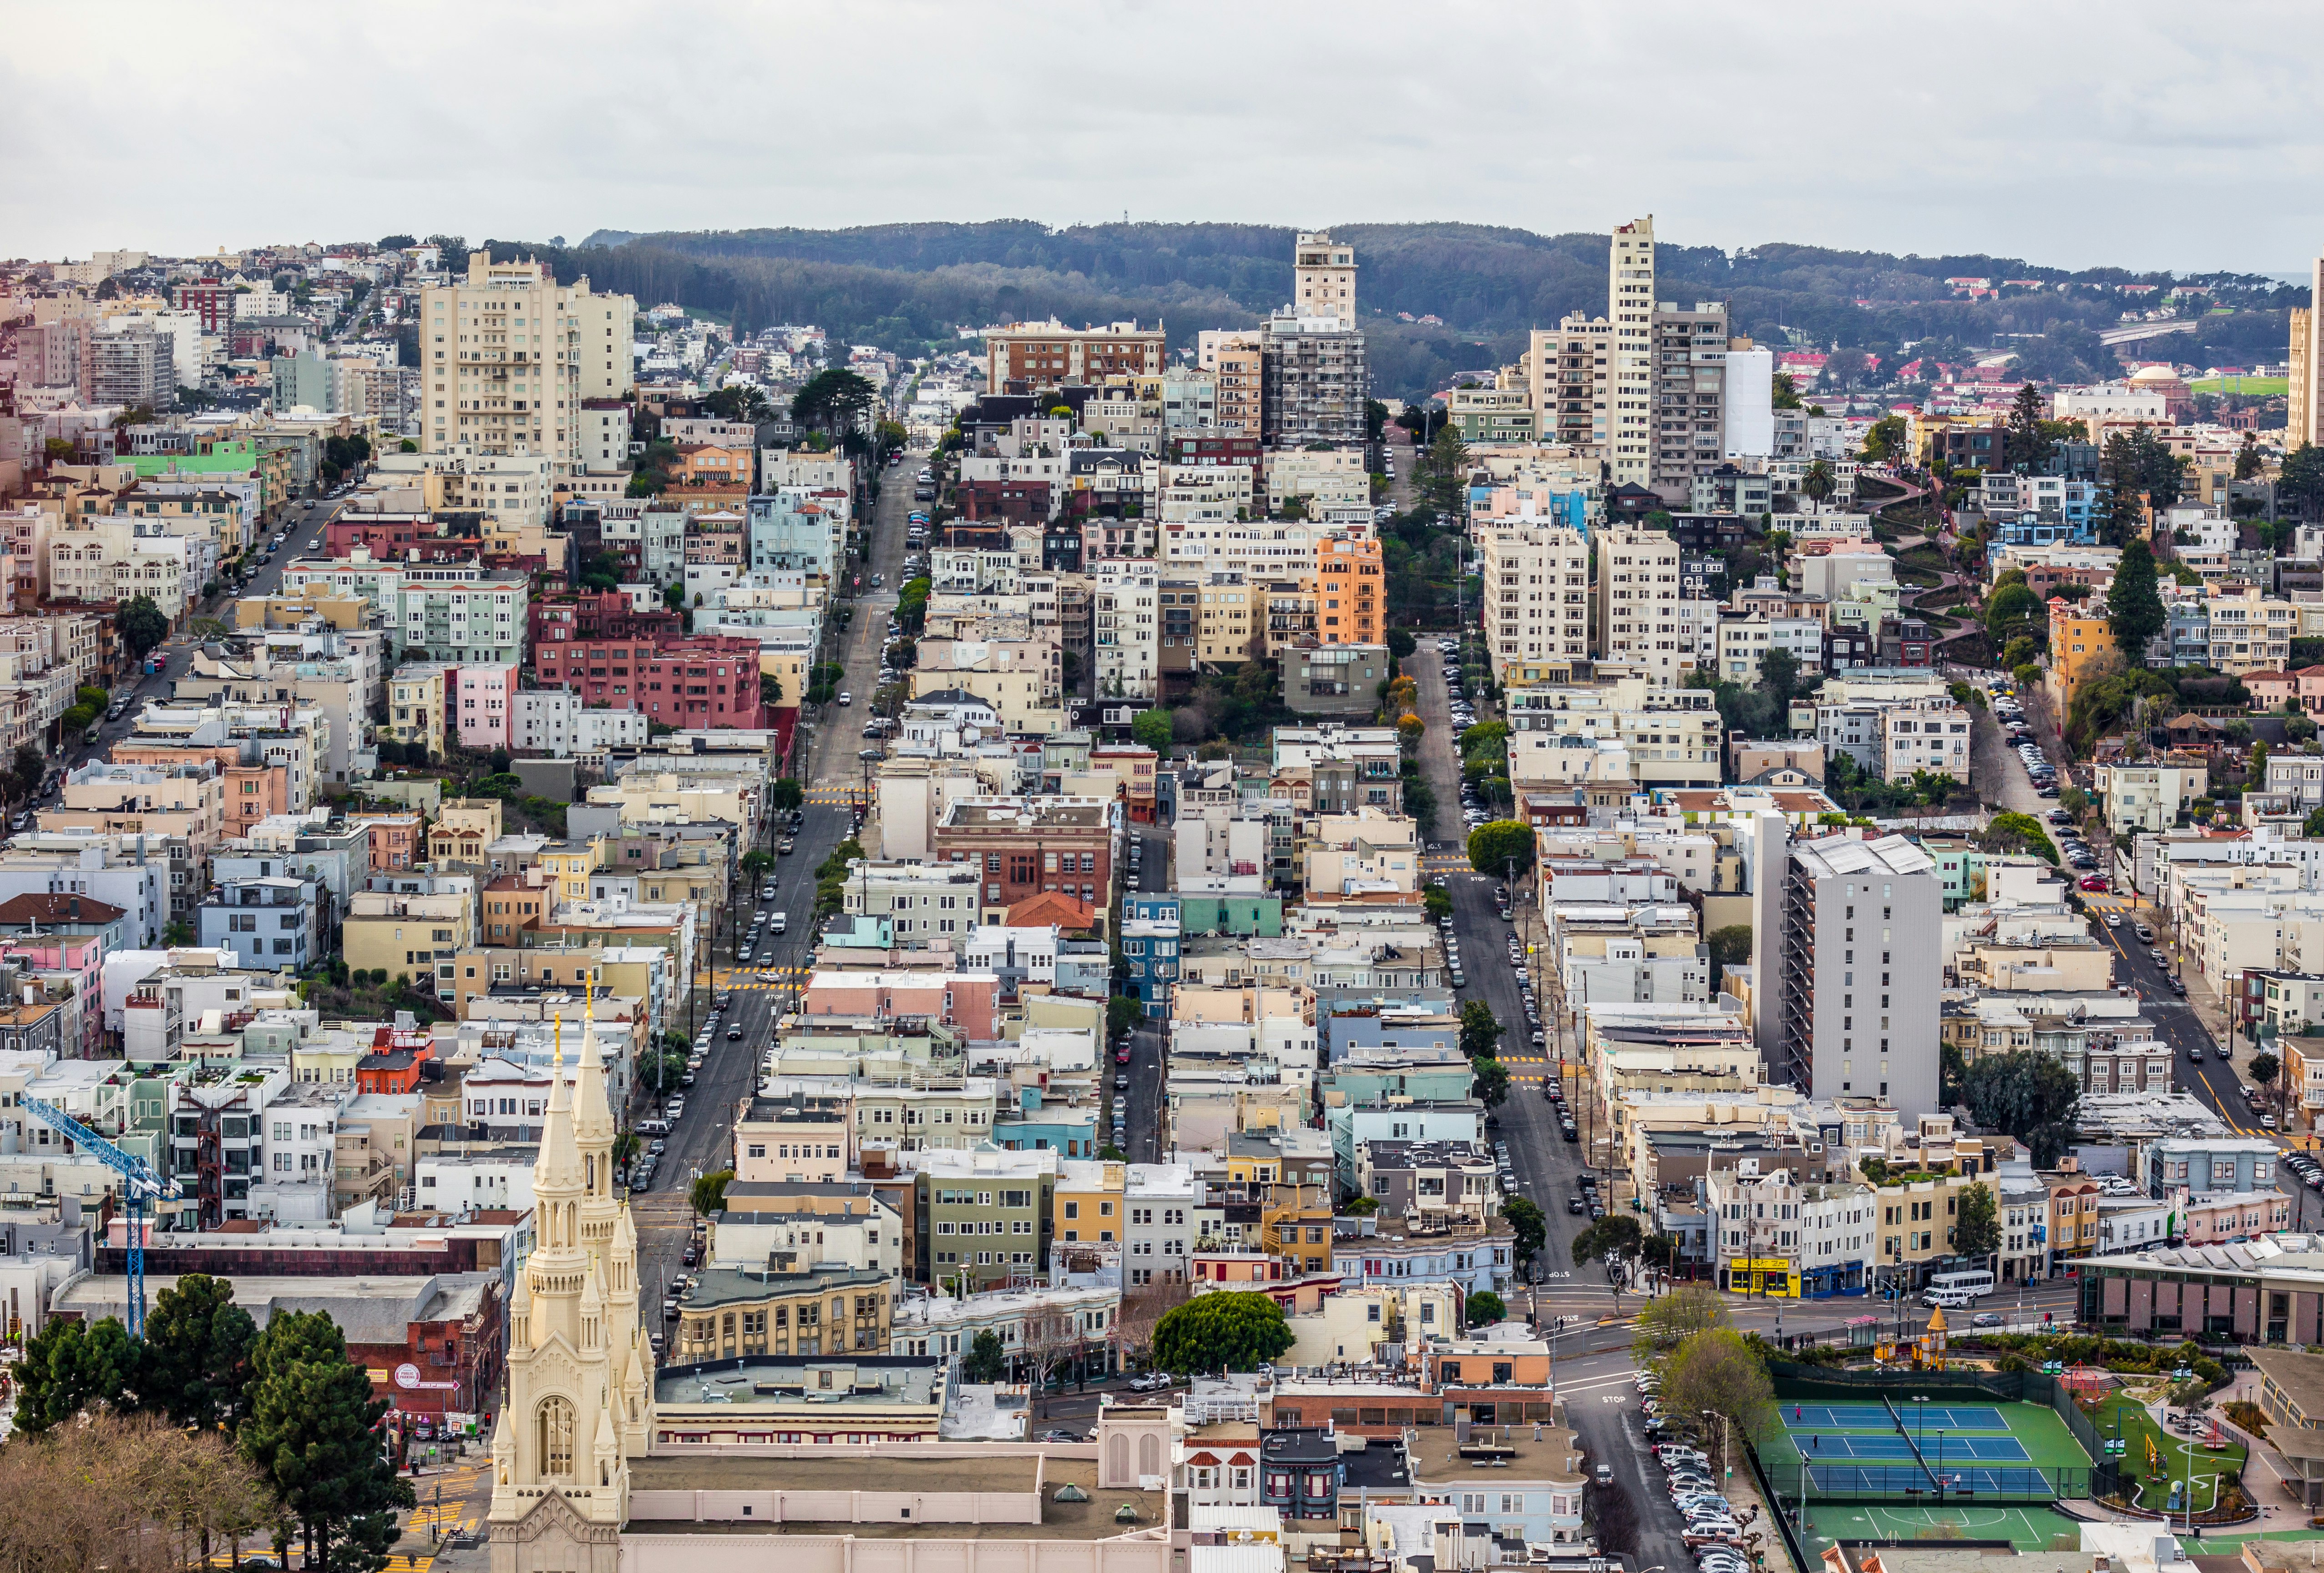 I love the wavy streets of San Francisco. When you take a close look, you can see the Lombard Street.